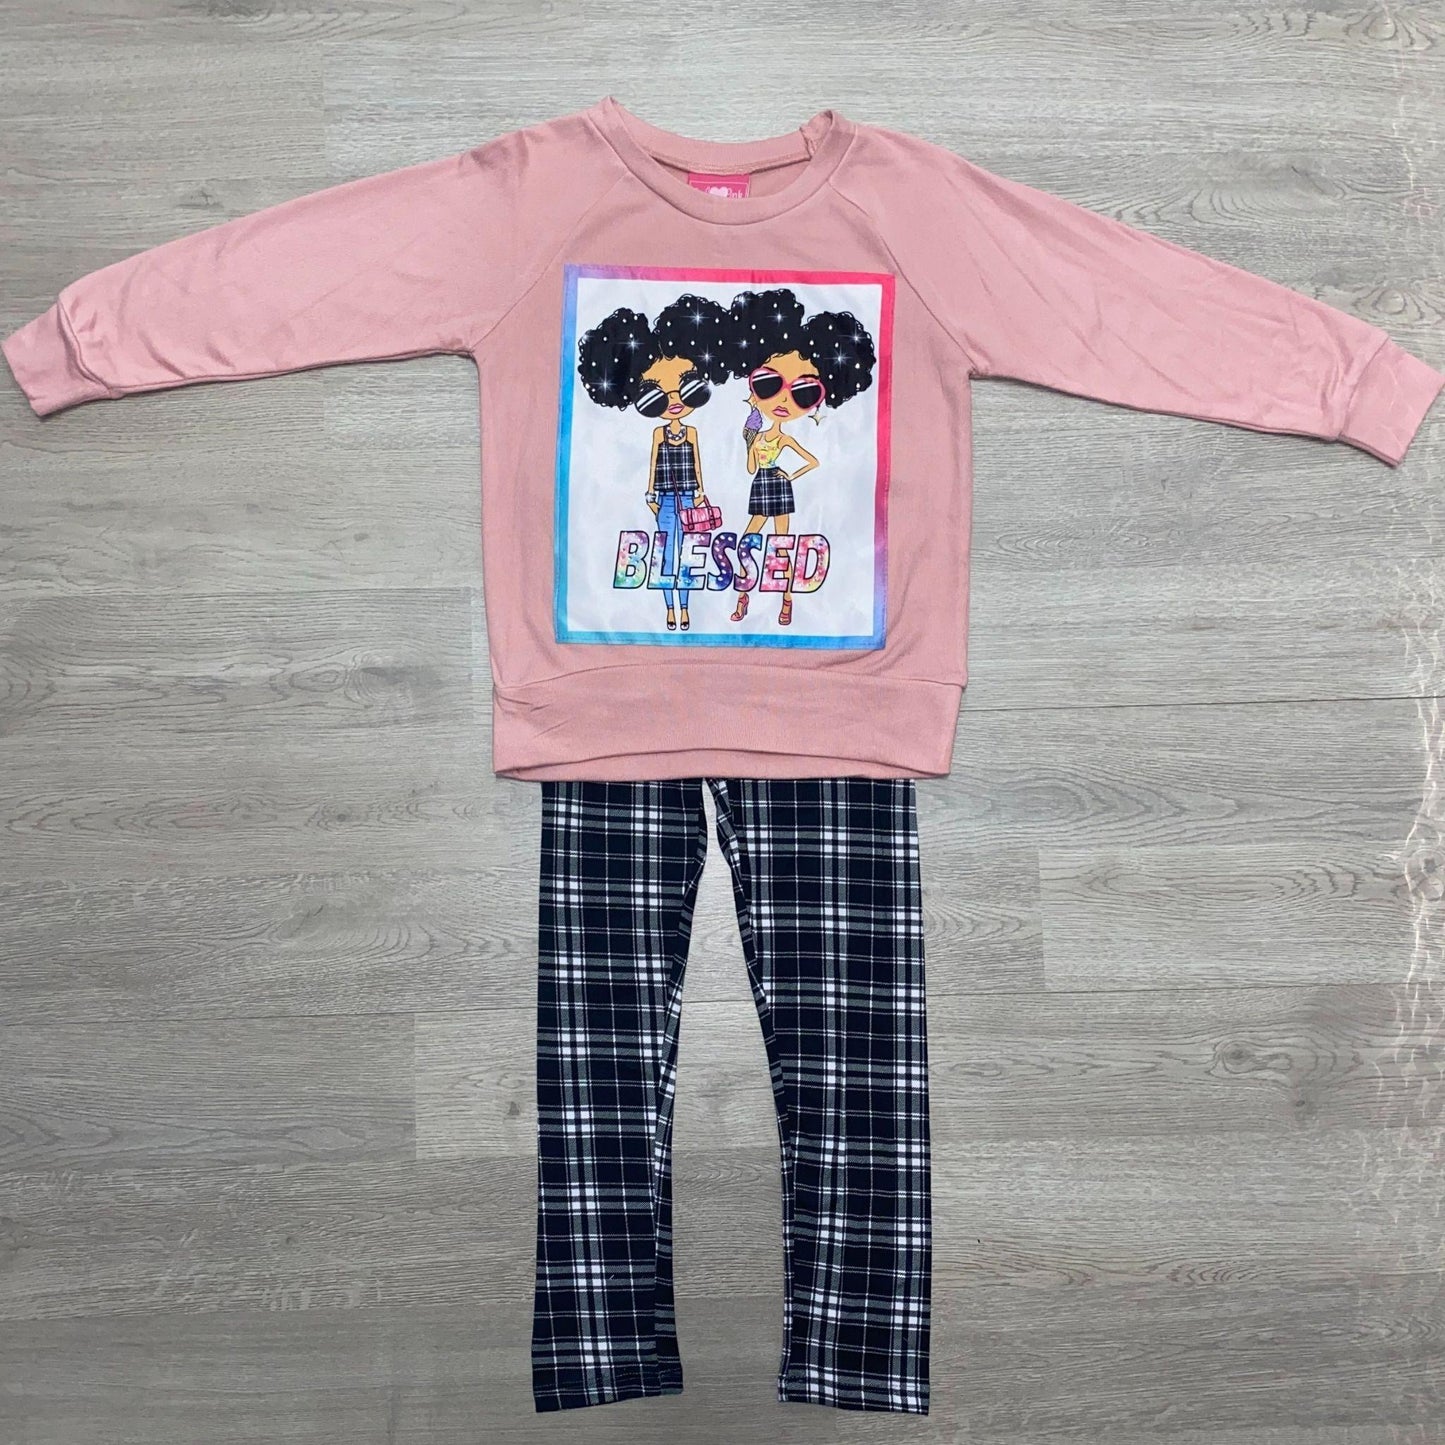 Get ready for fall in this cozy legging set.  This set features a dusty rose colored top with a screen pressed "Blessed" design and black and white plaid leggings.